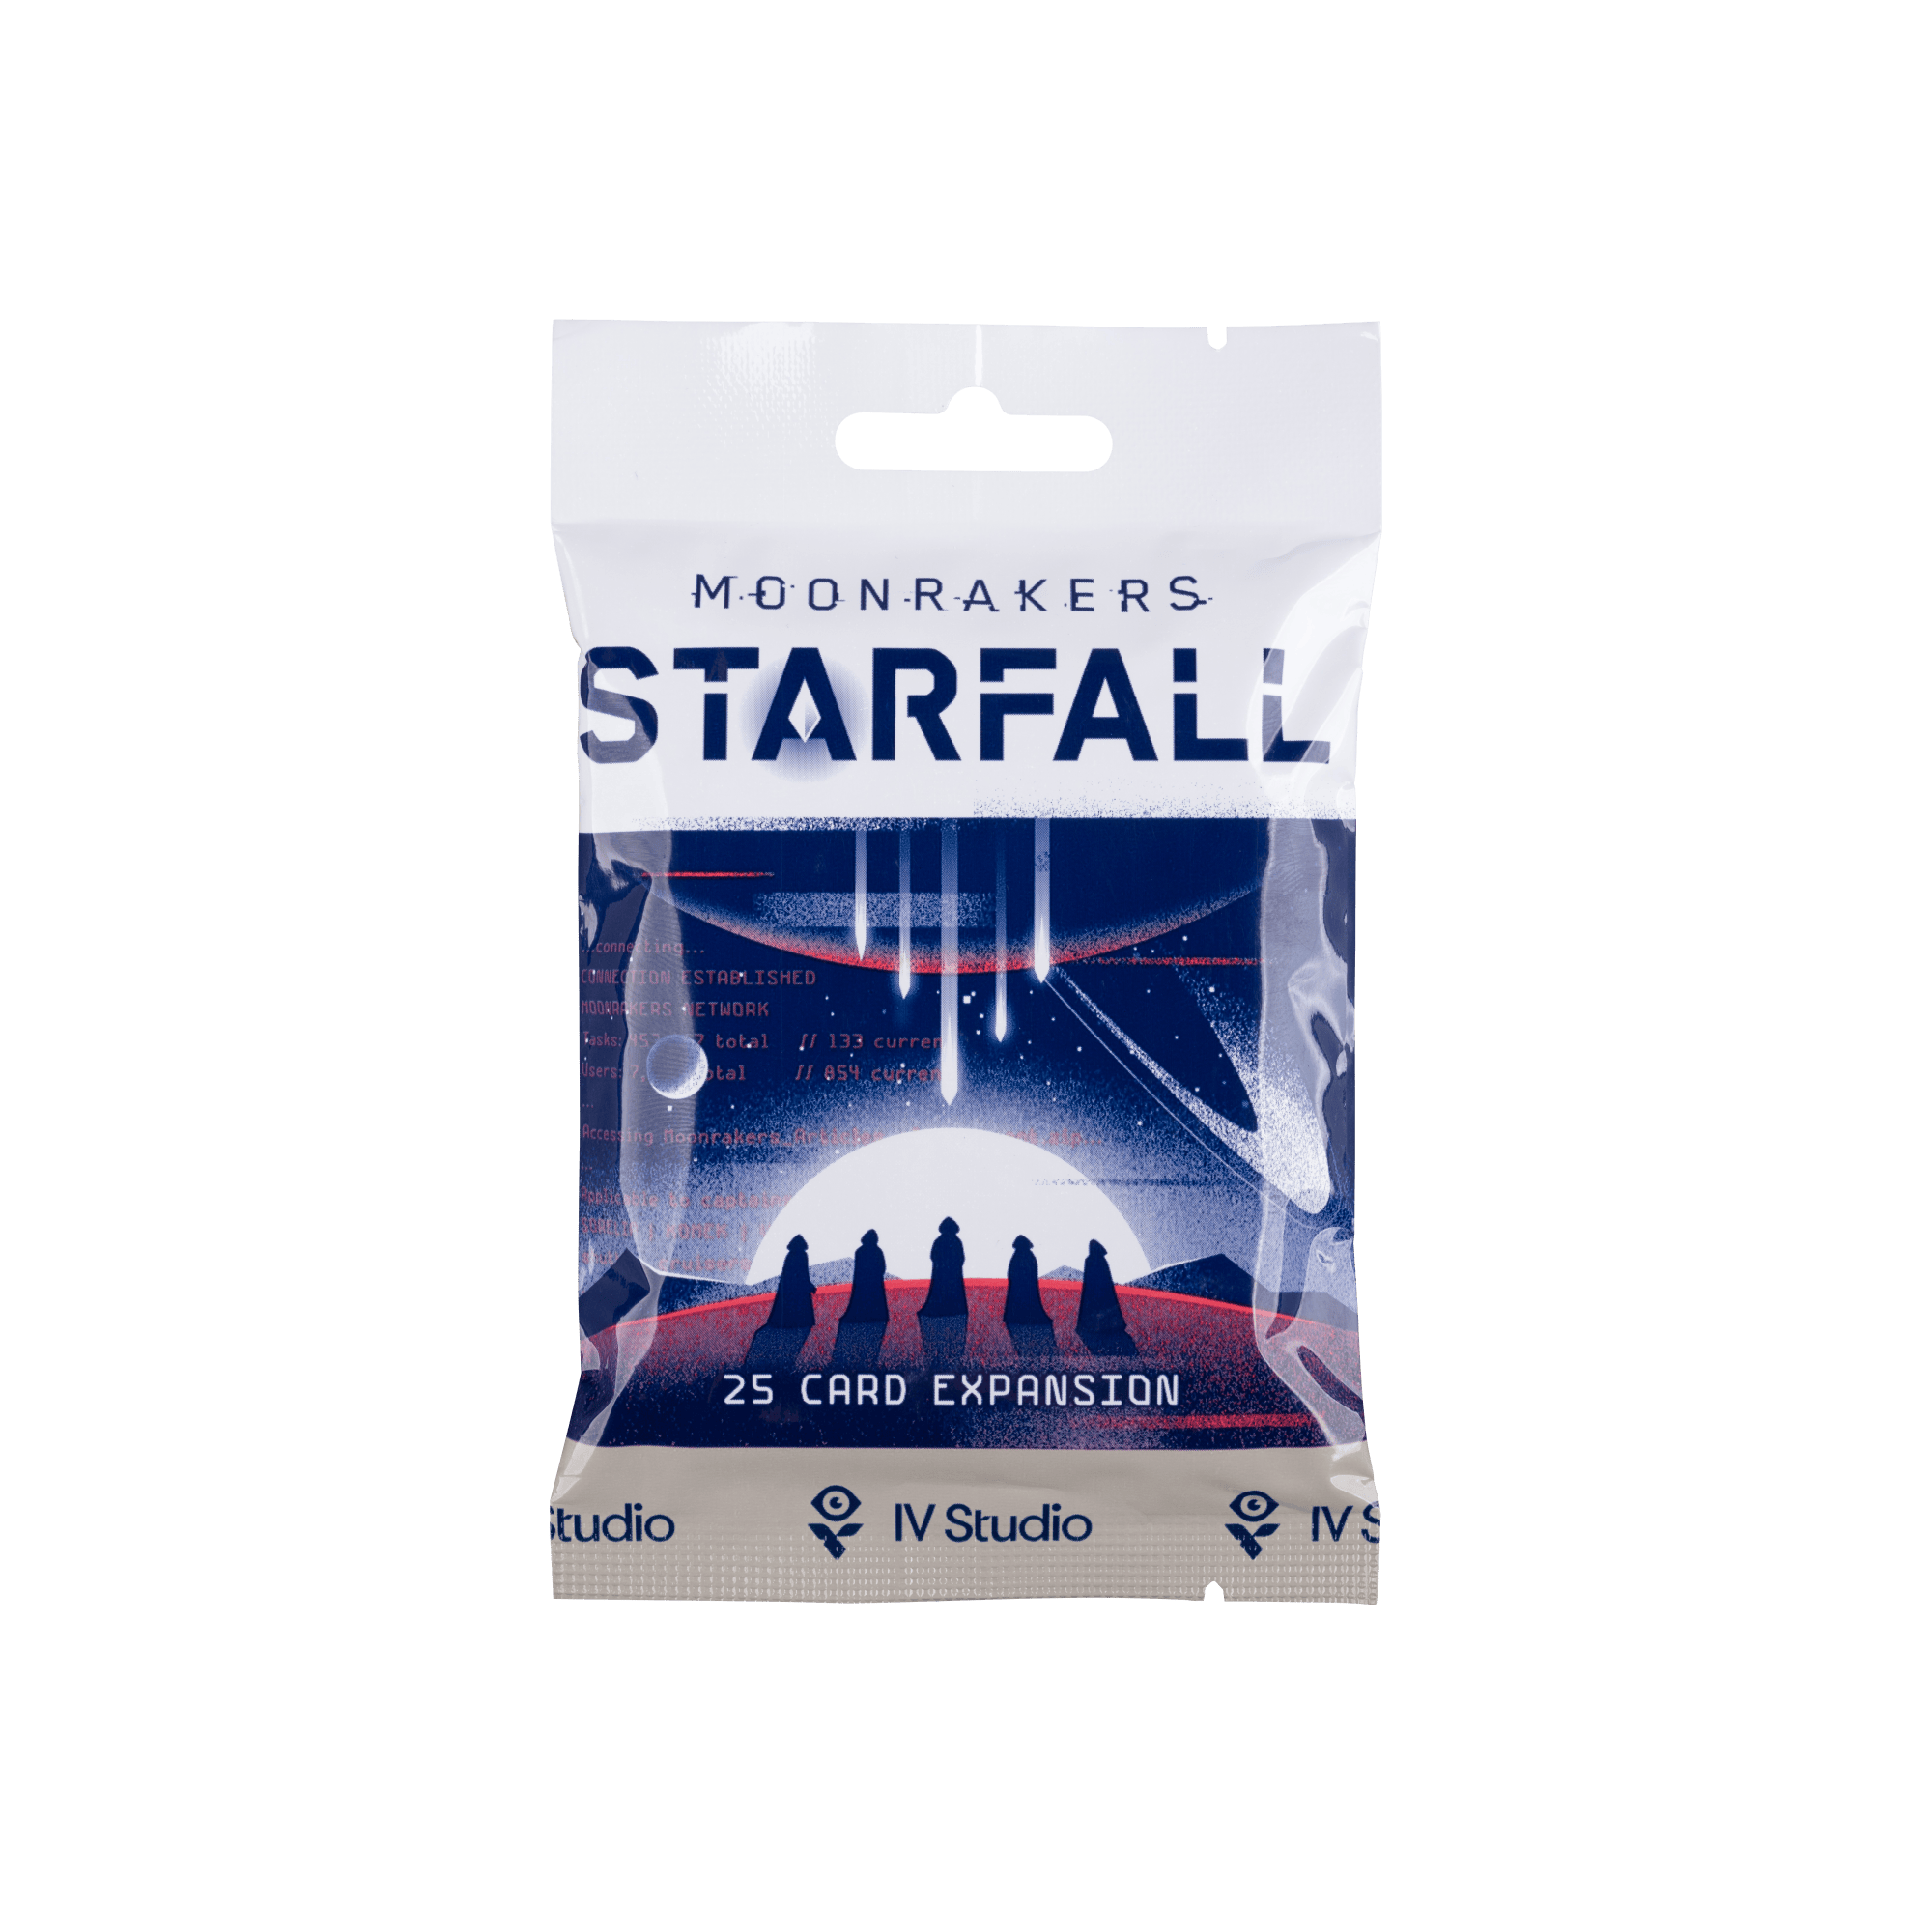 The Starfall: A Moonrakers Micro-expansion